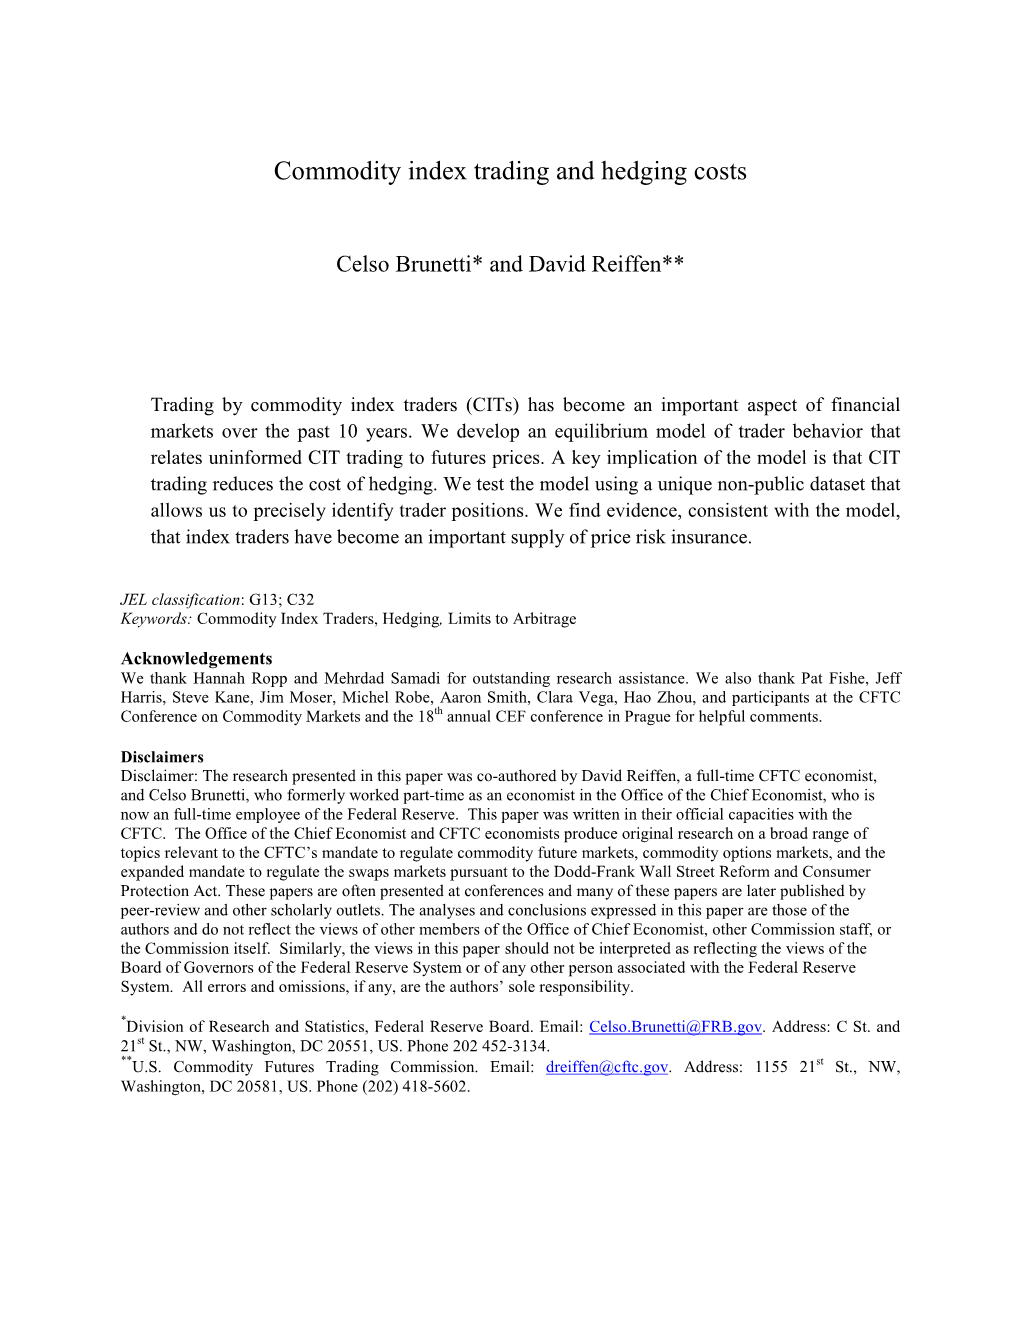 Commodity Index Trading and Hedging Costs